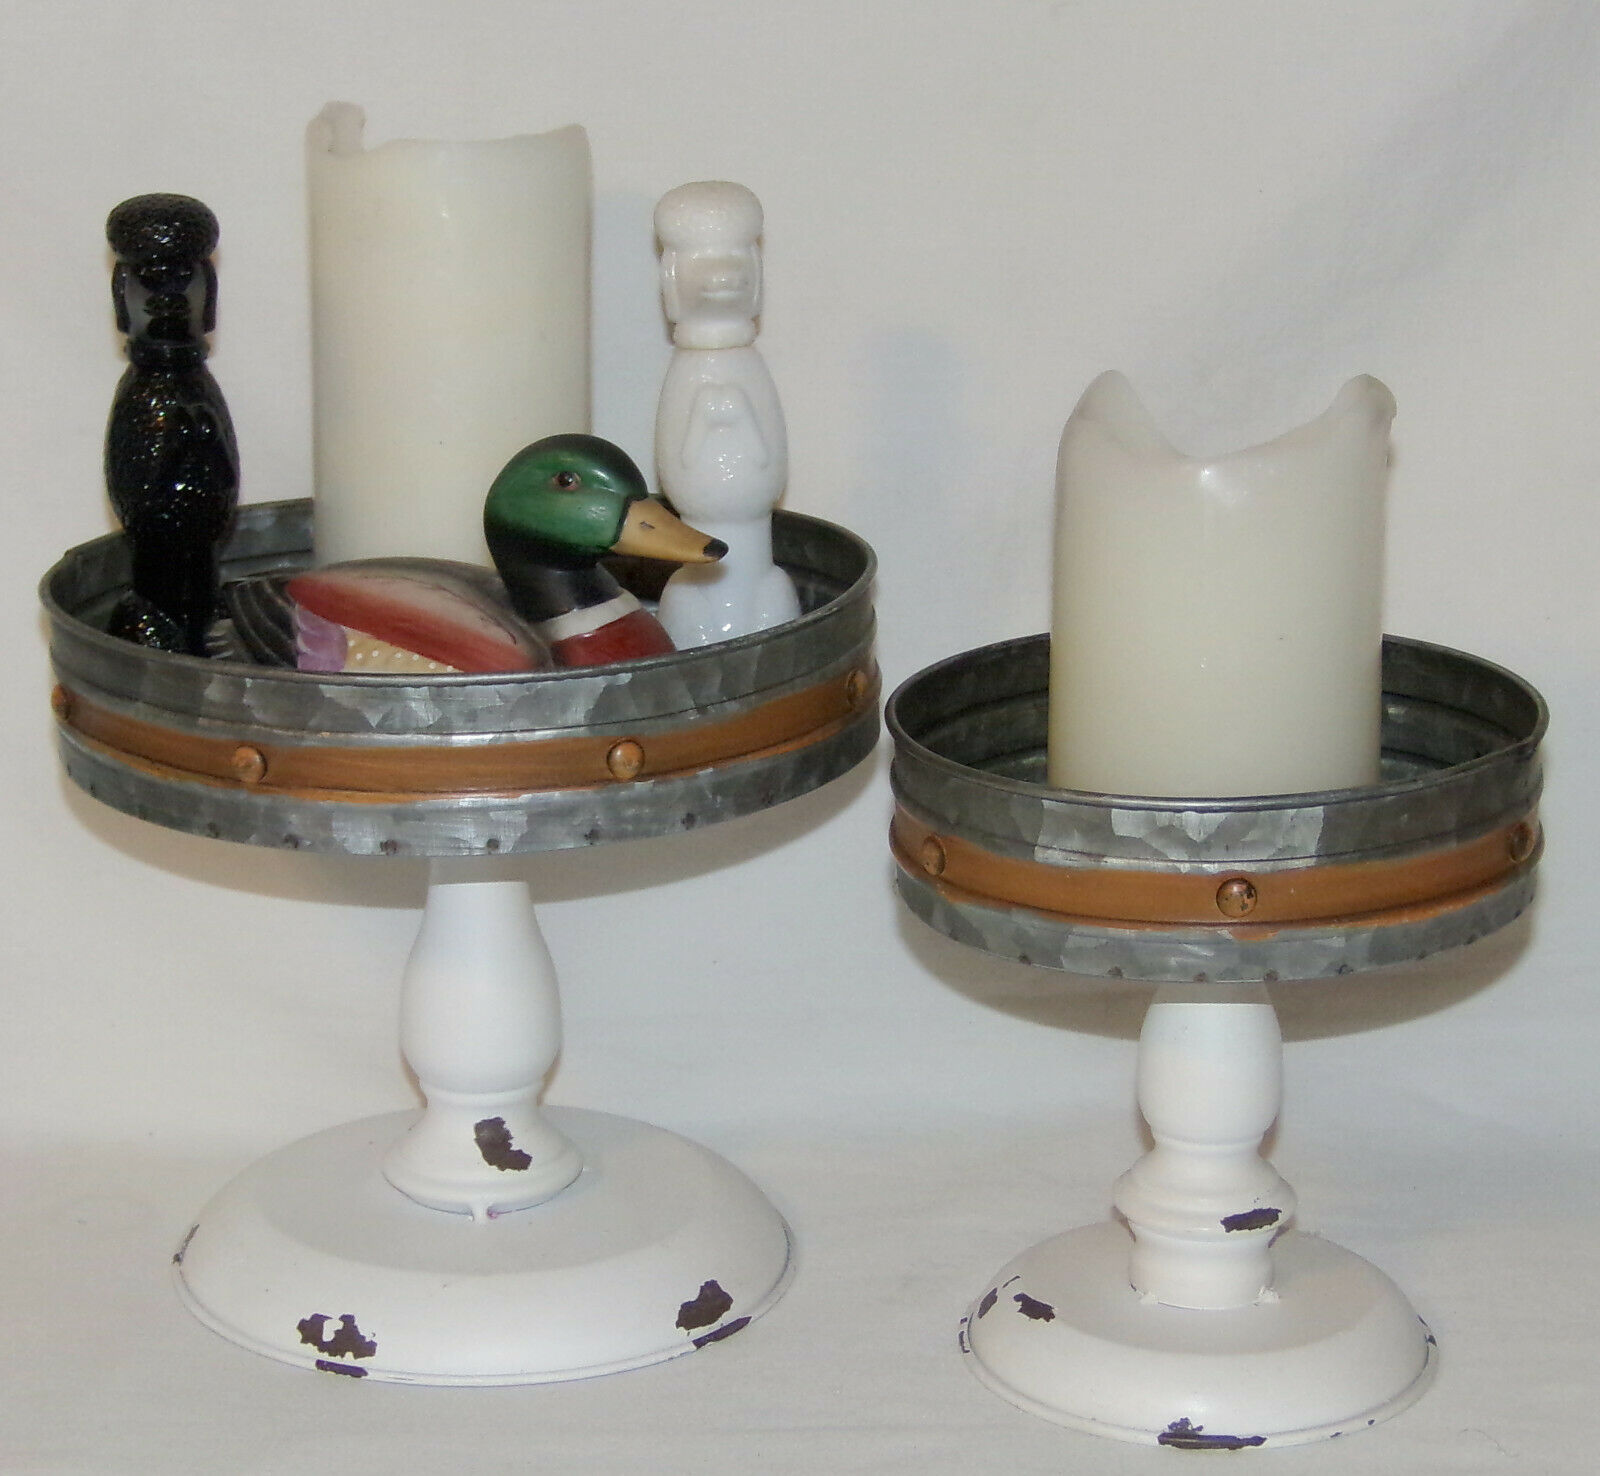 Pedestal Trays Risers Stands Pans Rustic Metal Candle Holders Set or Single New